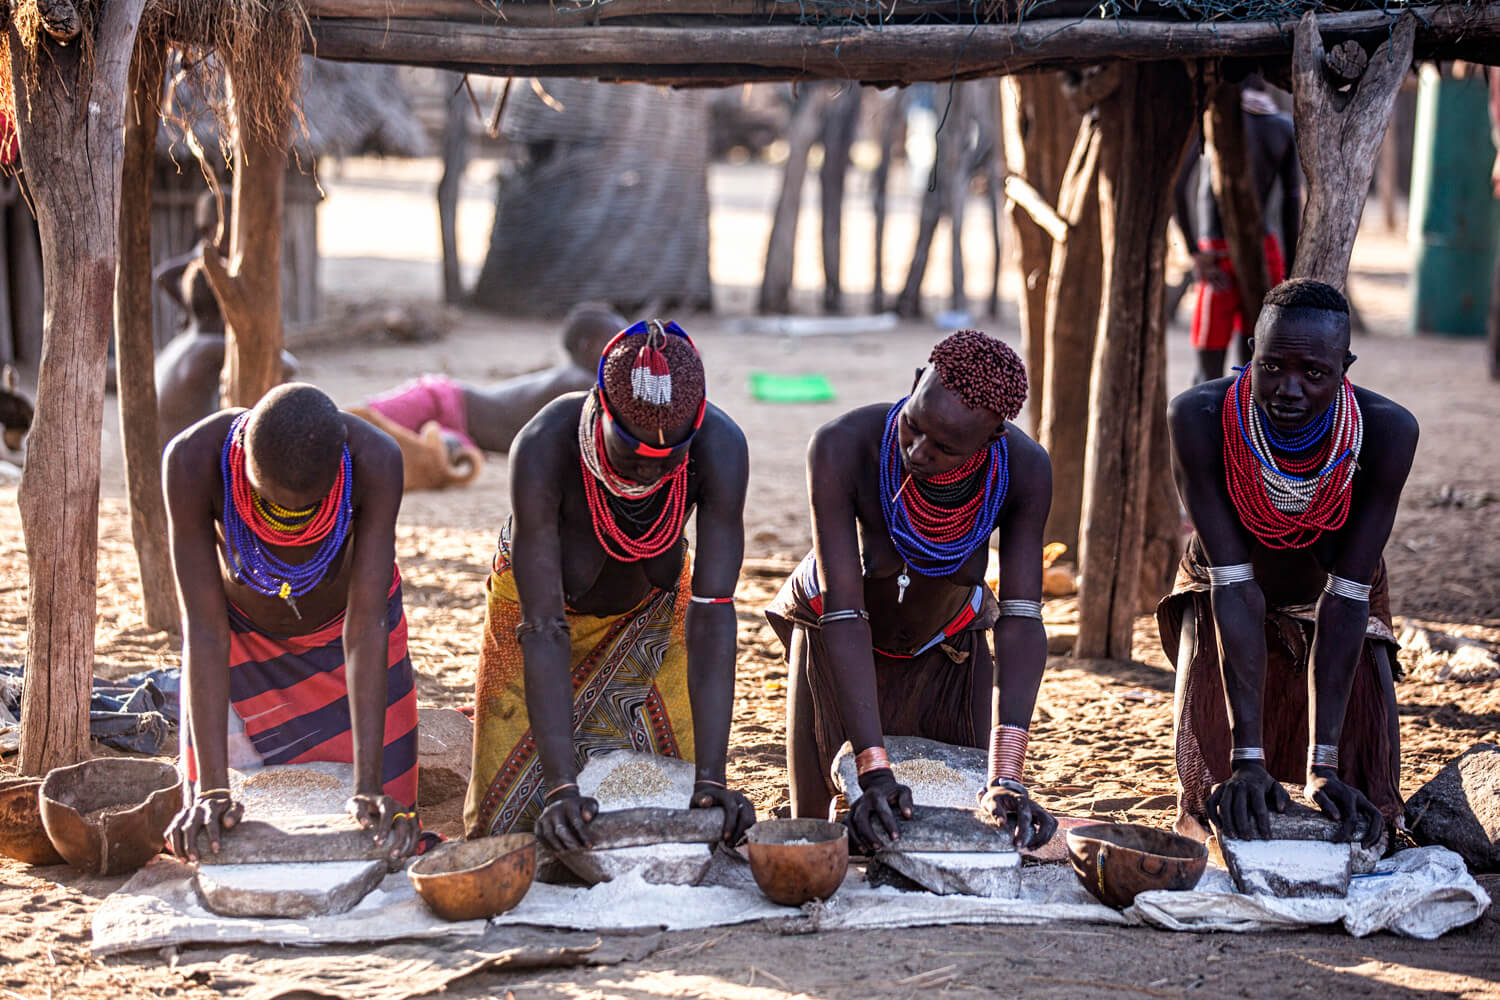 Four individuals in traditional African attire, adorned with colourful beaded necklaces, are grinding grain using large stone tools in a village setting.